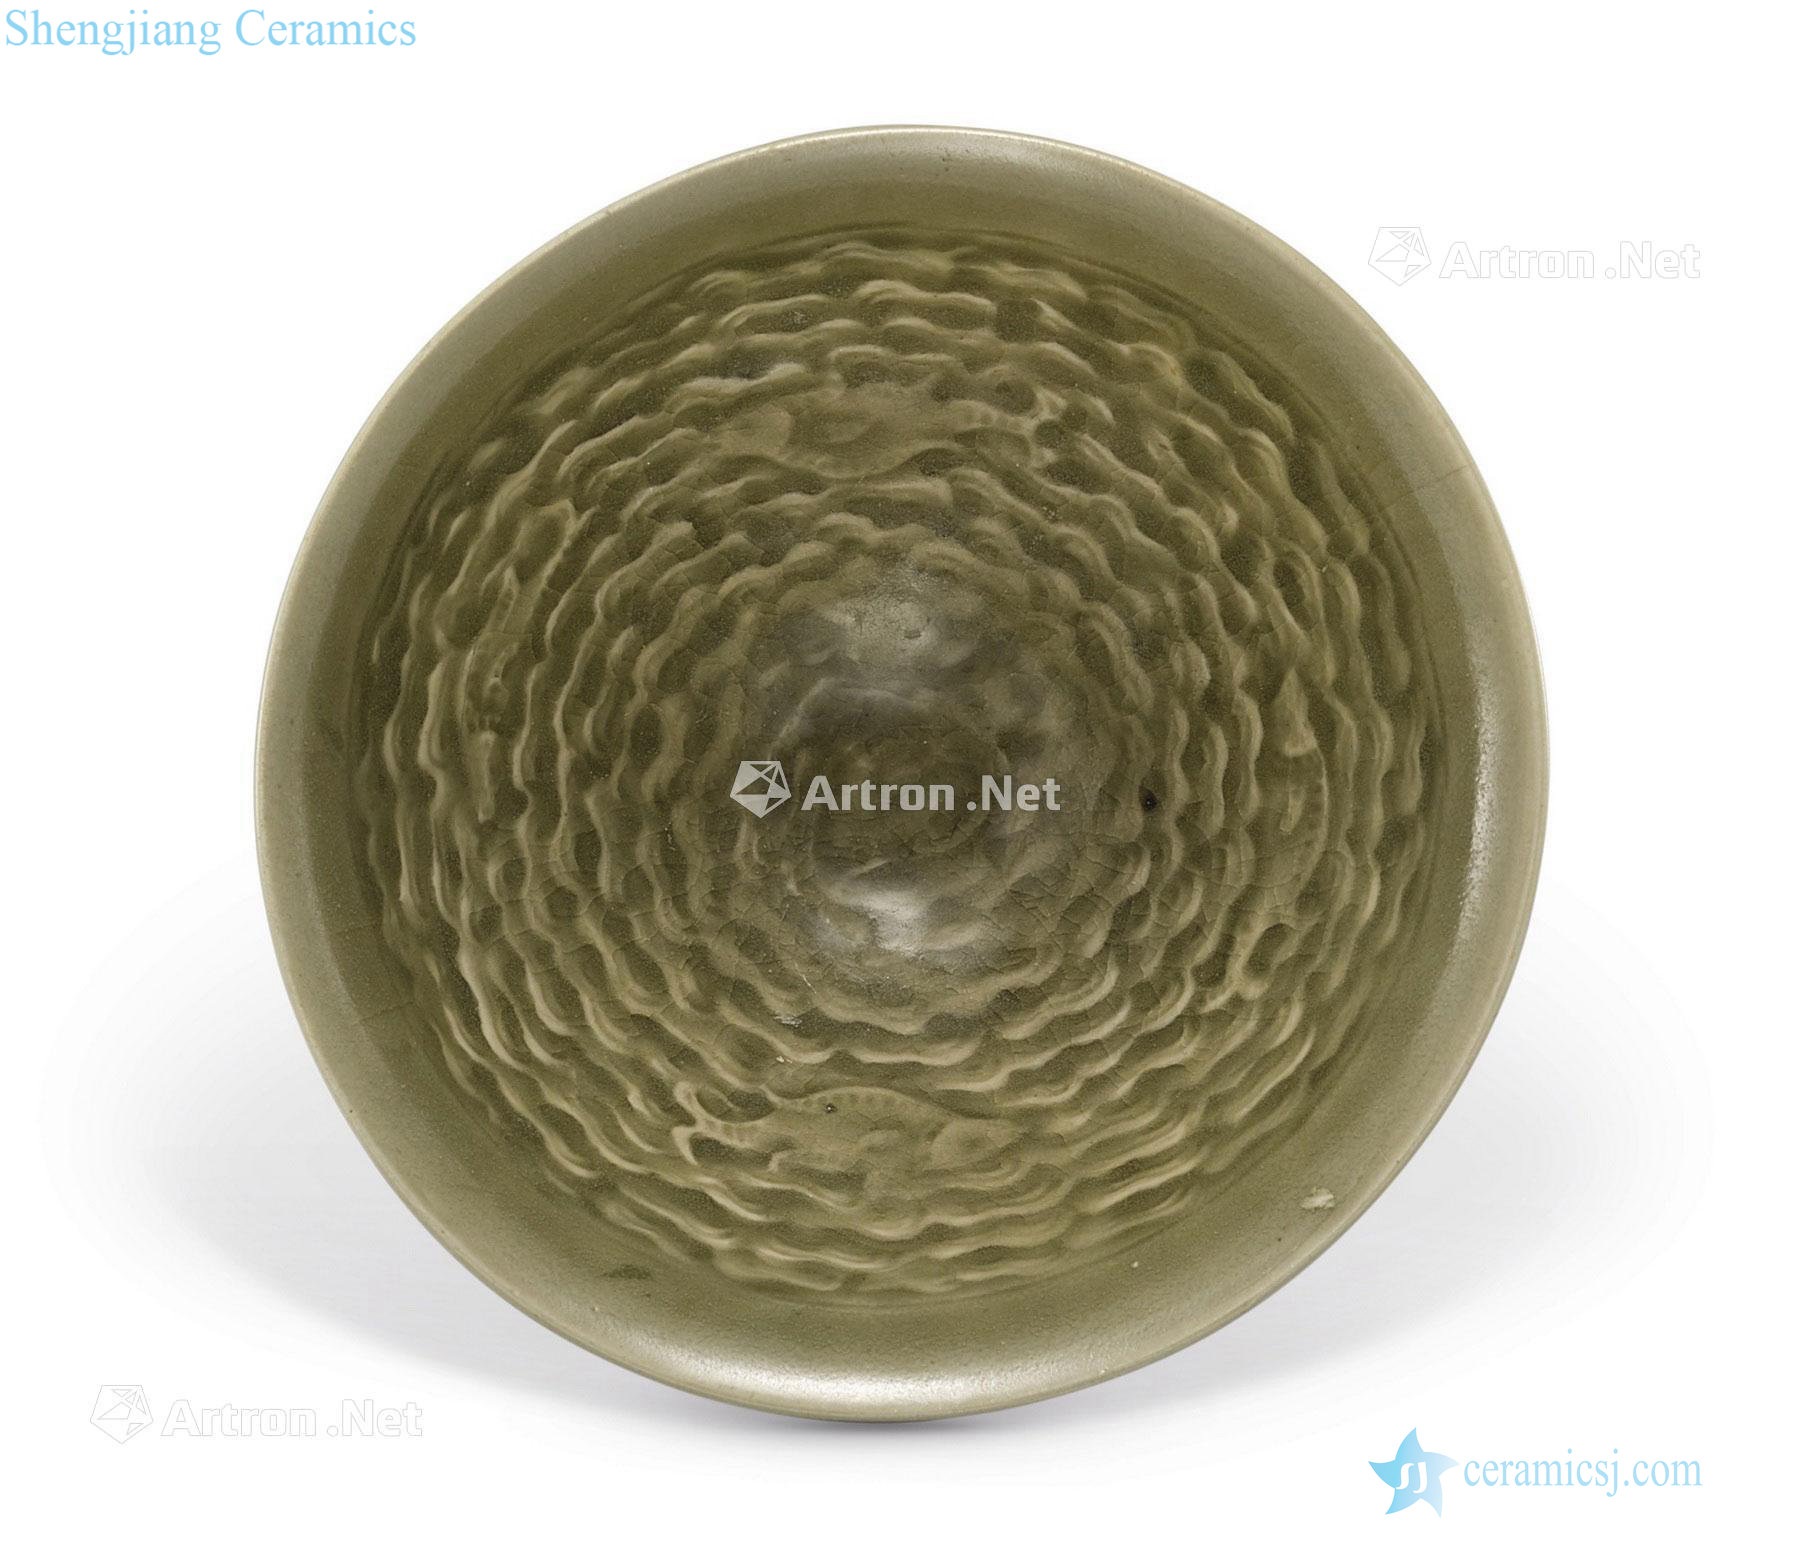 Northern song dynasty to gold Green glaze seawater fish grain 盌 yao states